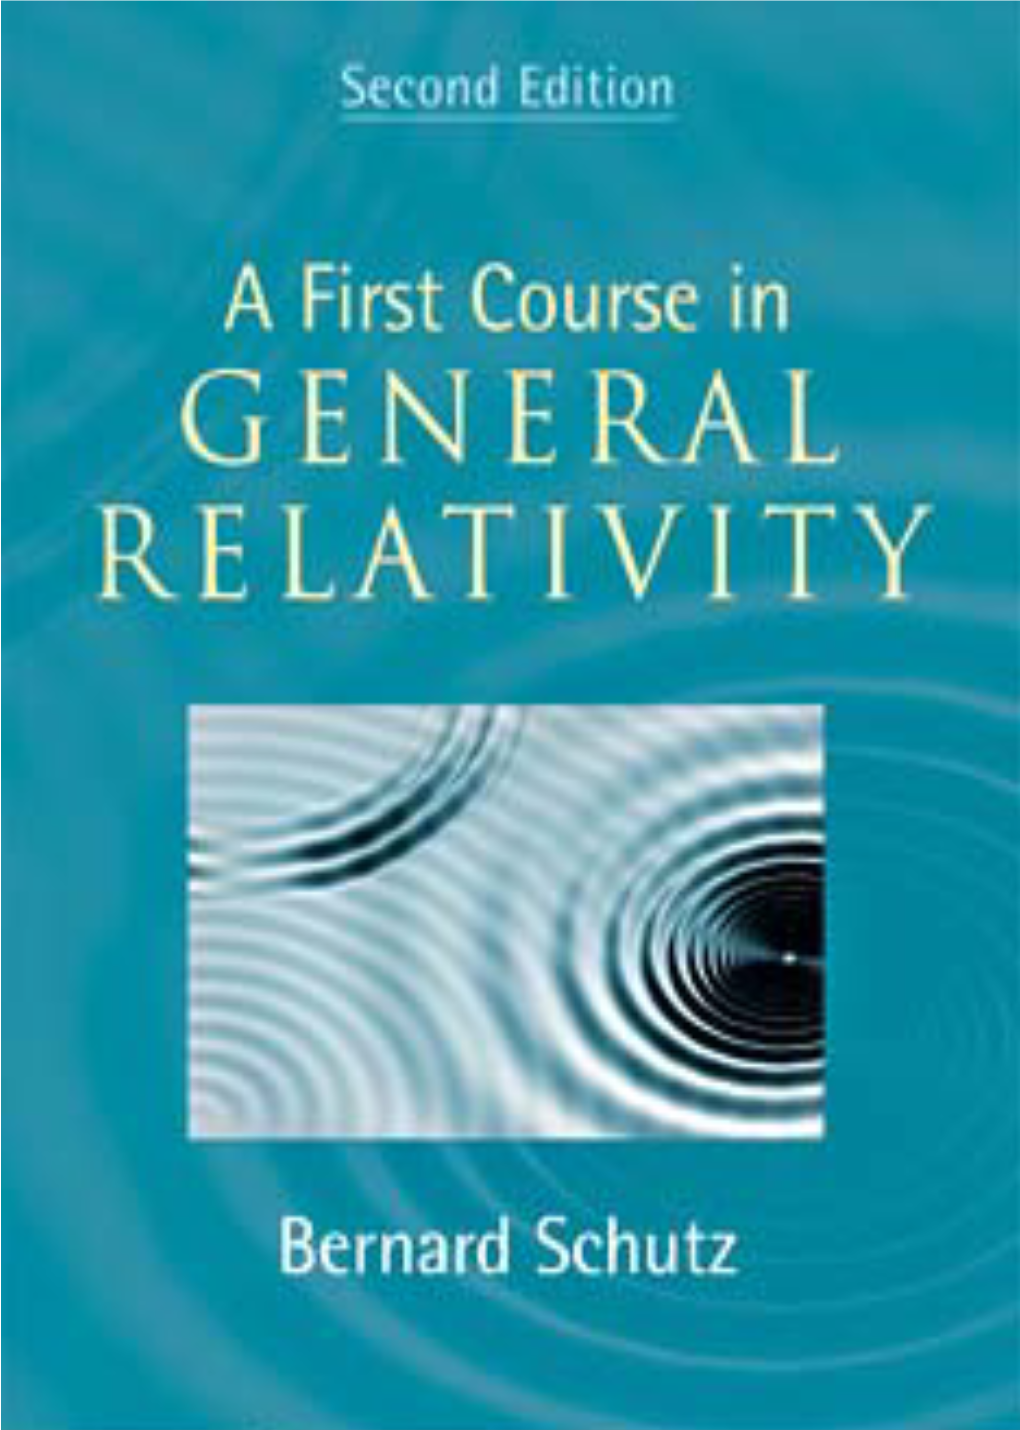 A First Course in General Relativity, Second Edition